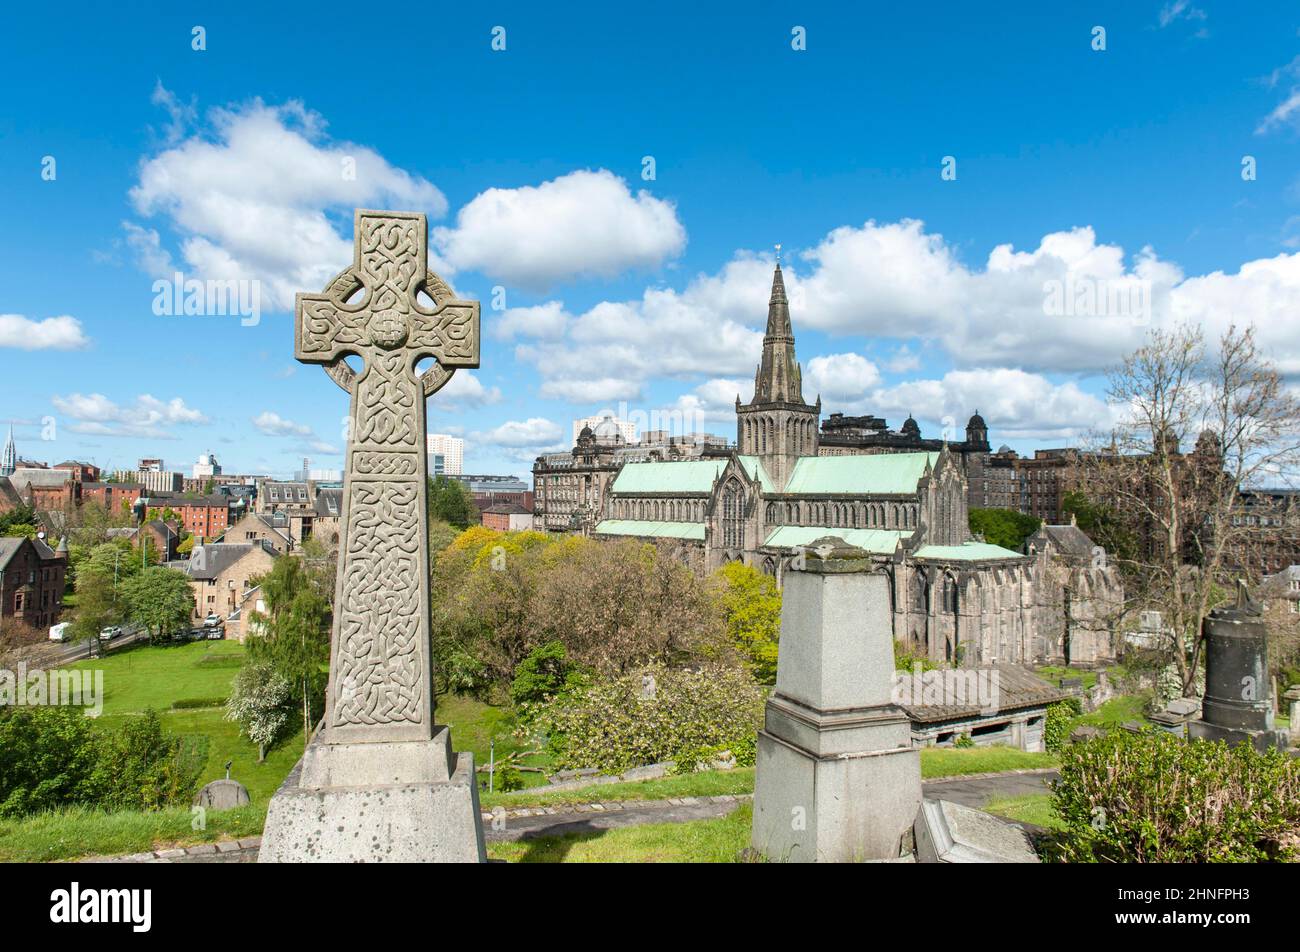 Ornamented Celtic High Cross, Cross, St Mungo's Cathedral, High Kirk of Glasgow, View from Necropolis, Necropolis, Glasgow, Scotland, United Kingdom Stock Photo